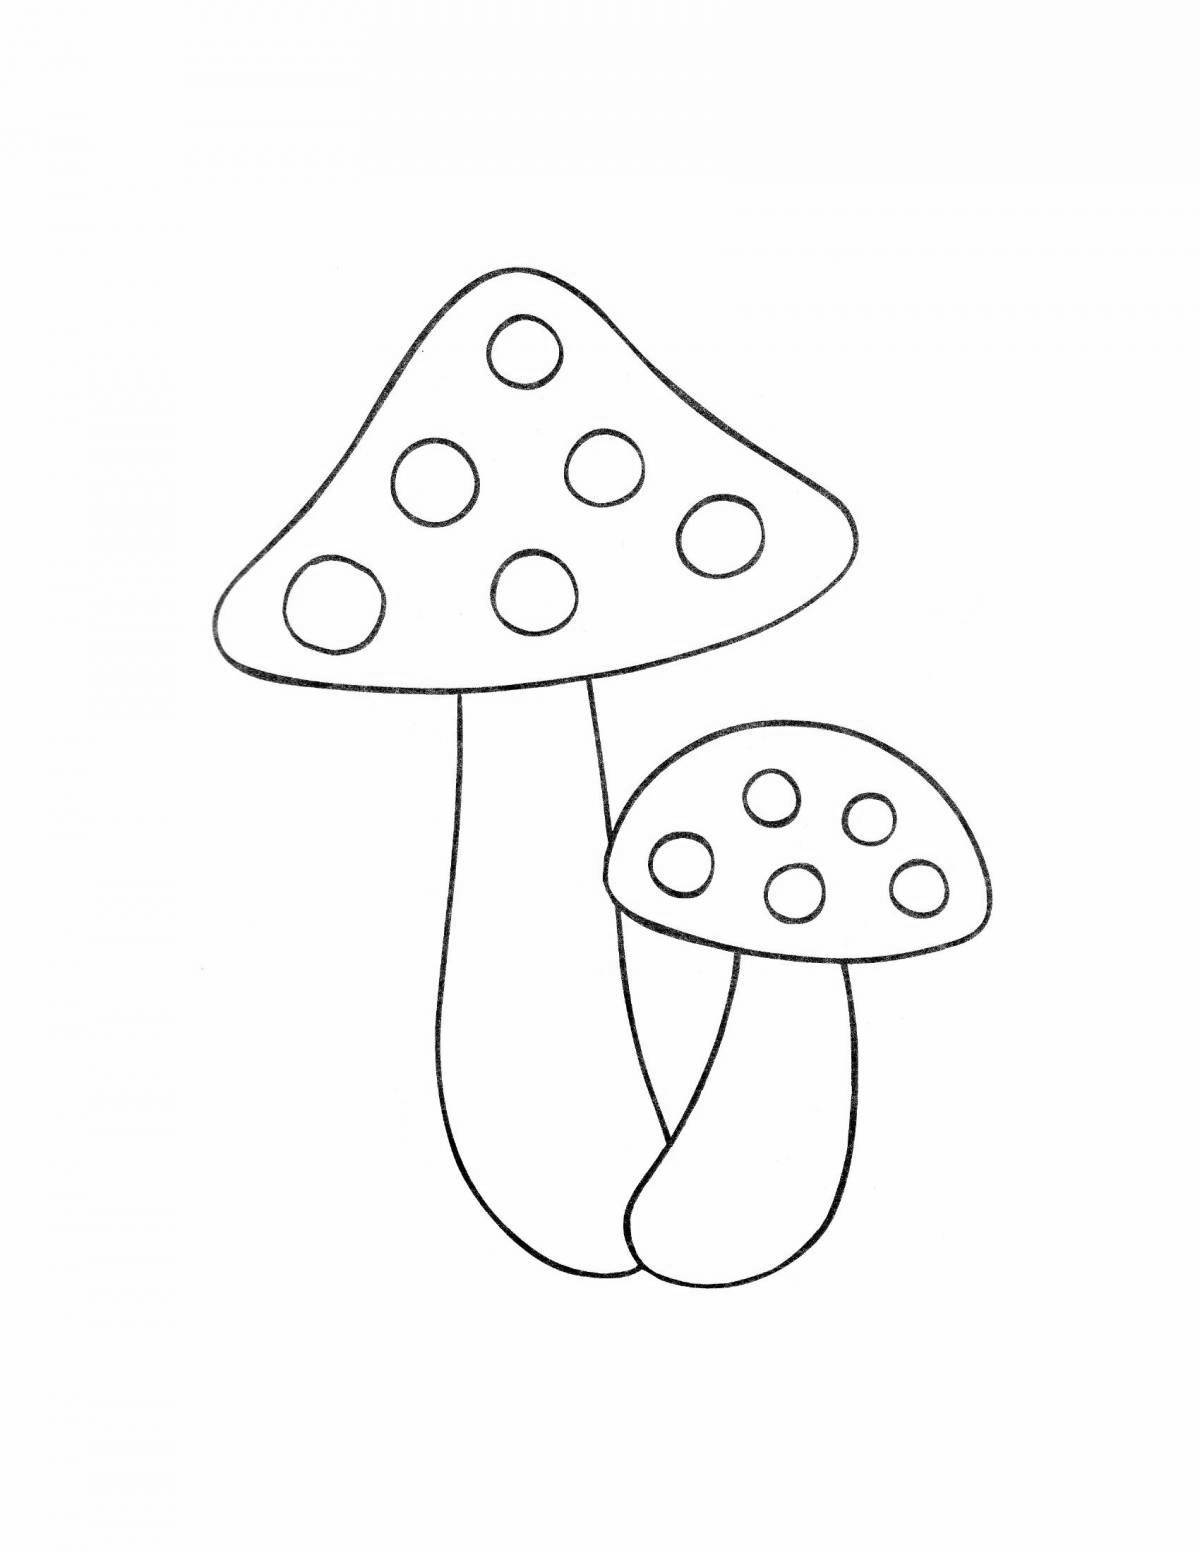 Colorful fly agaric drawing for kids